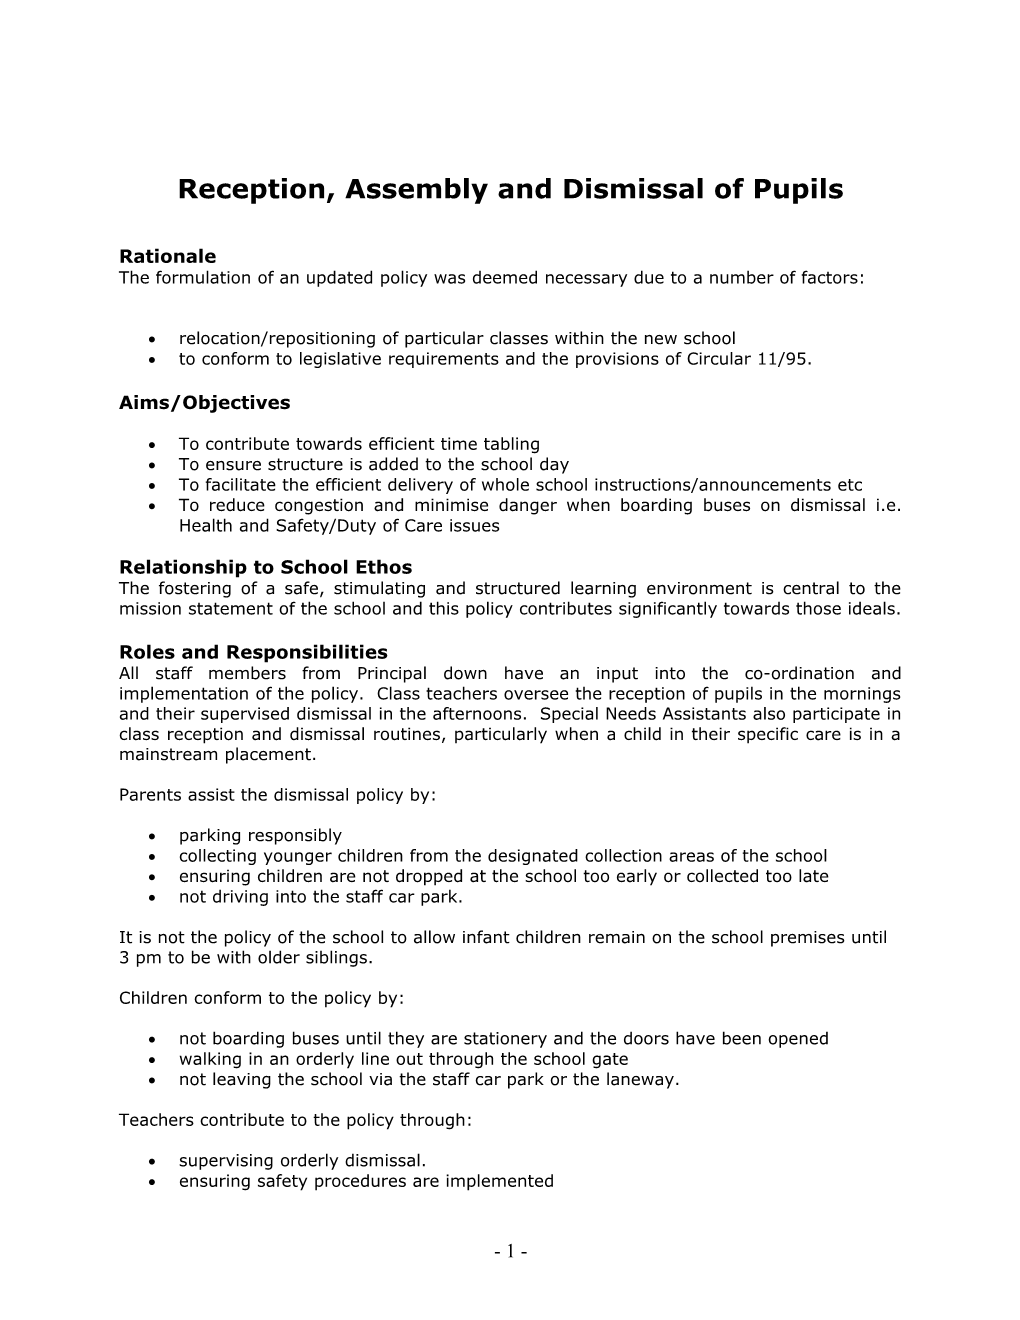 Reception, Assembly and Dismissal of Pupils